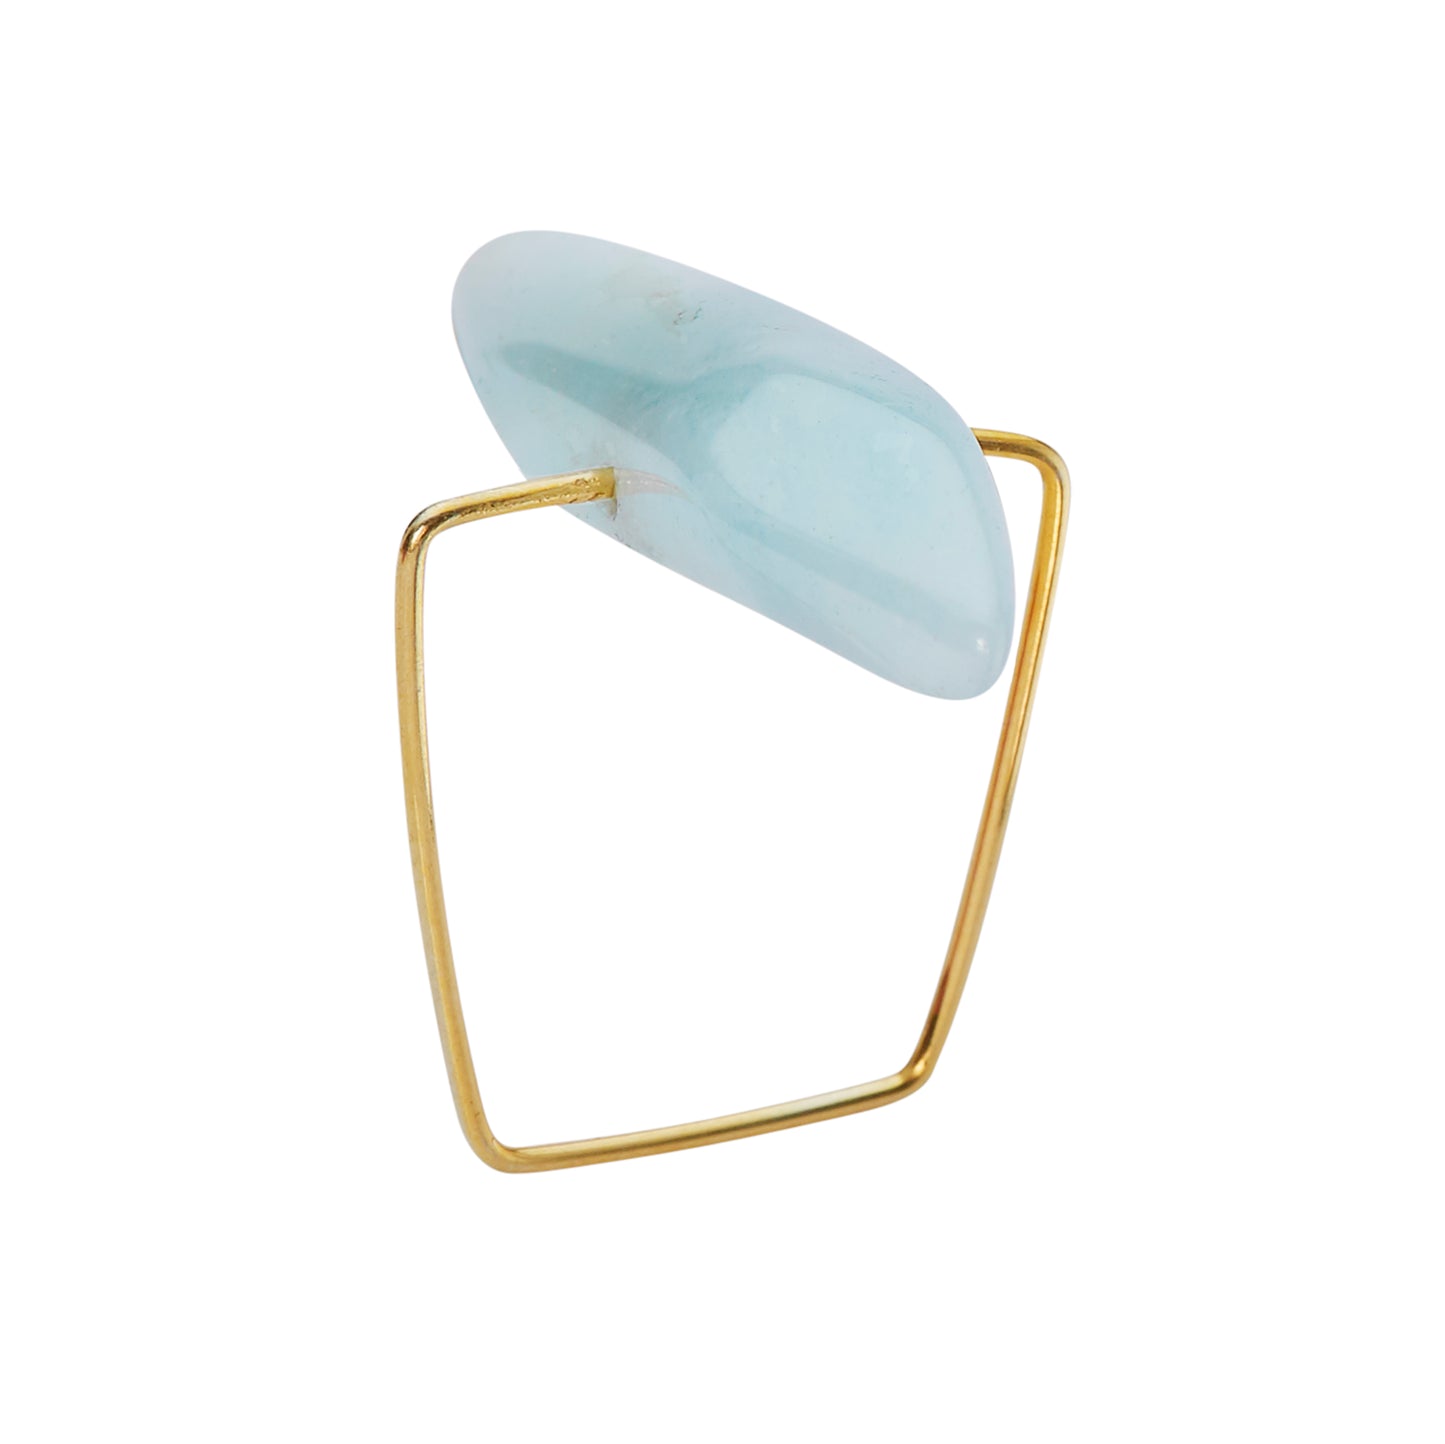 Square Ring with Aqua Marine facet ball & abstract faceted shard